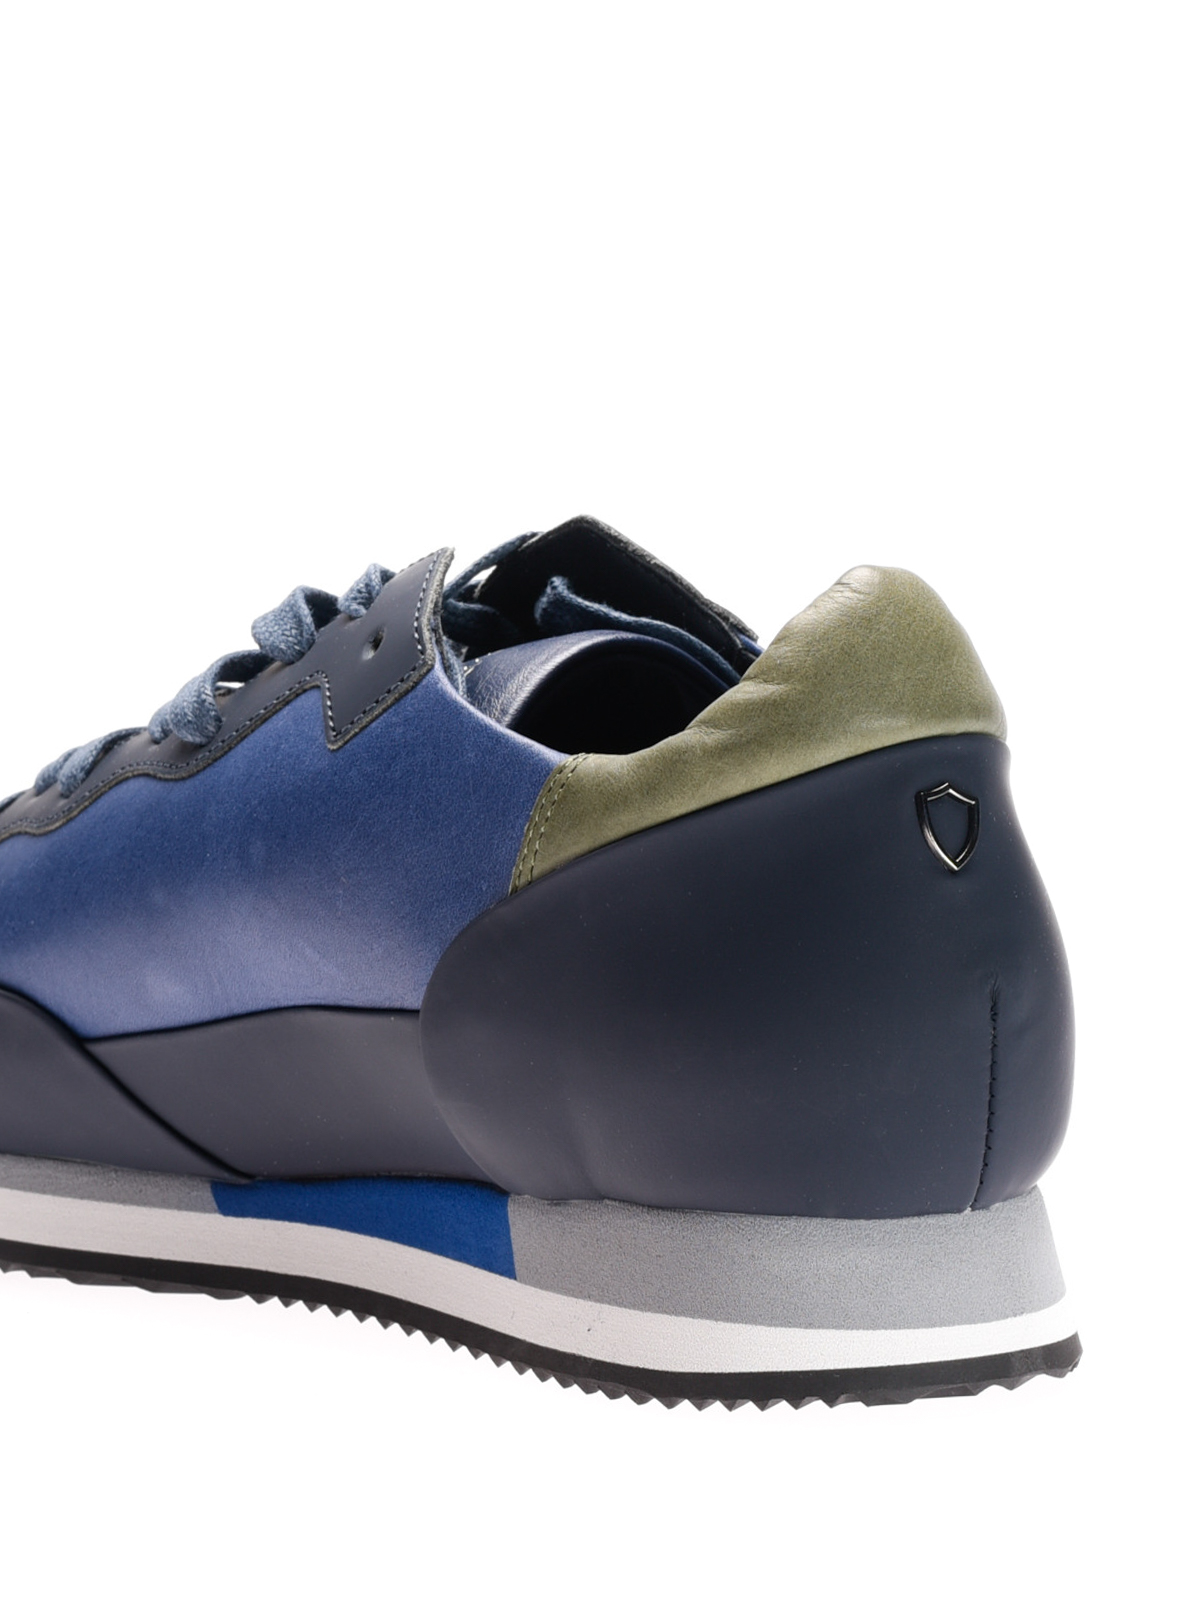 Trainers Philippe Model - Paradis sneakers - CHLUVL23 | iKRIX.com